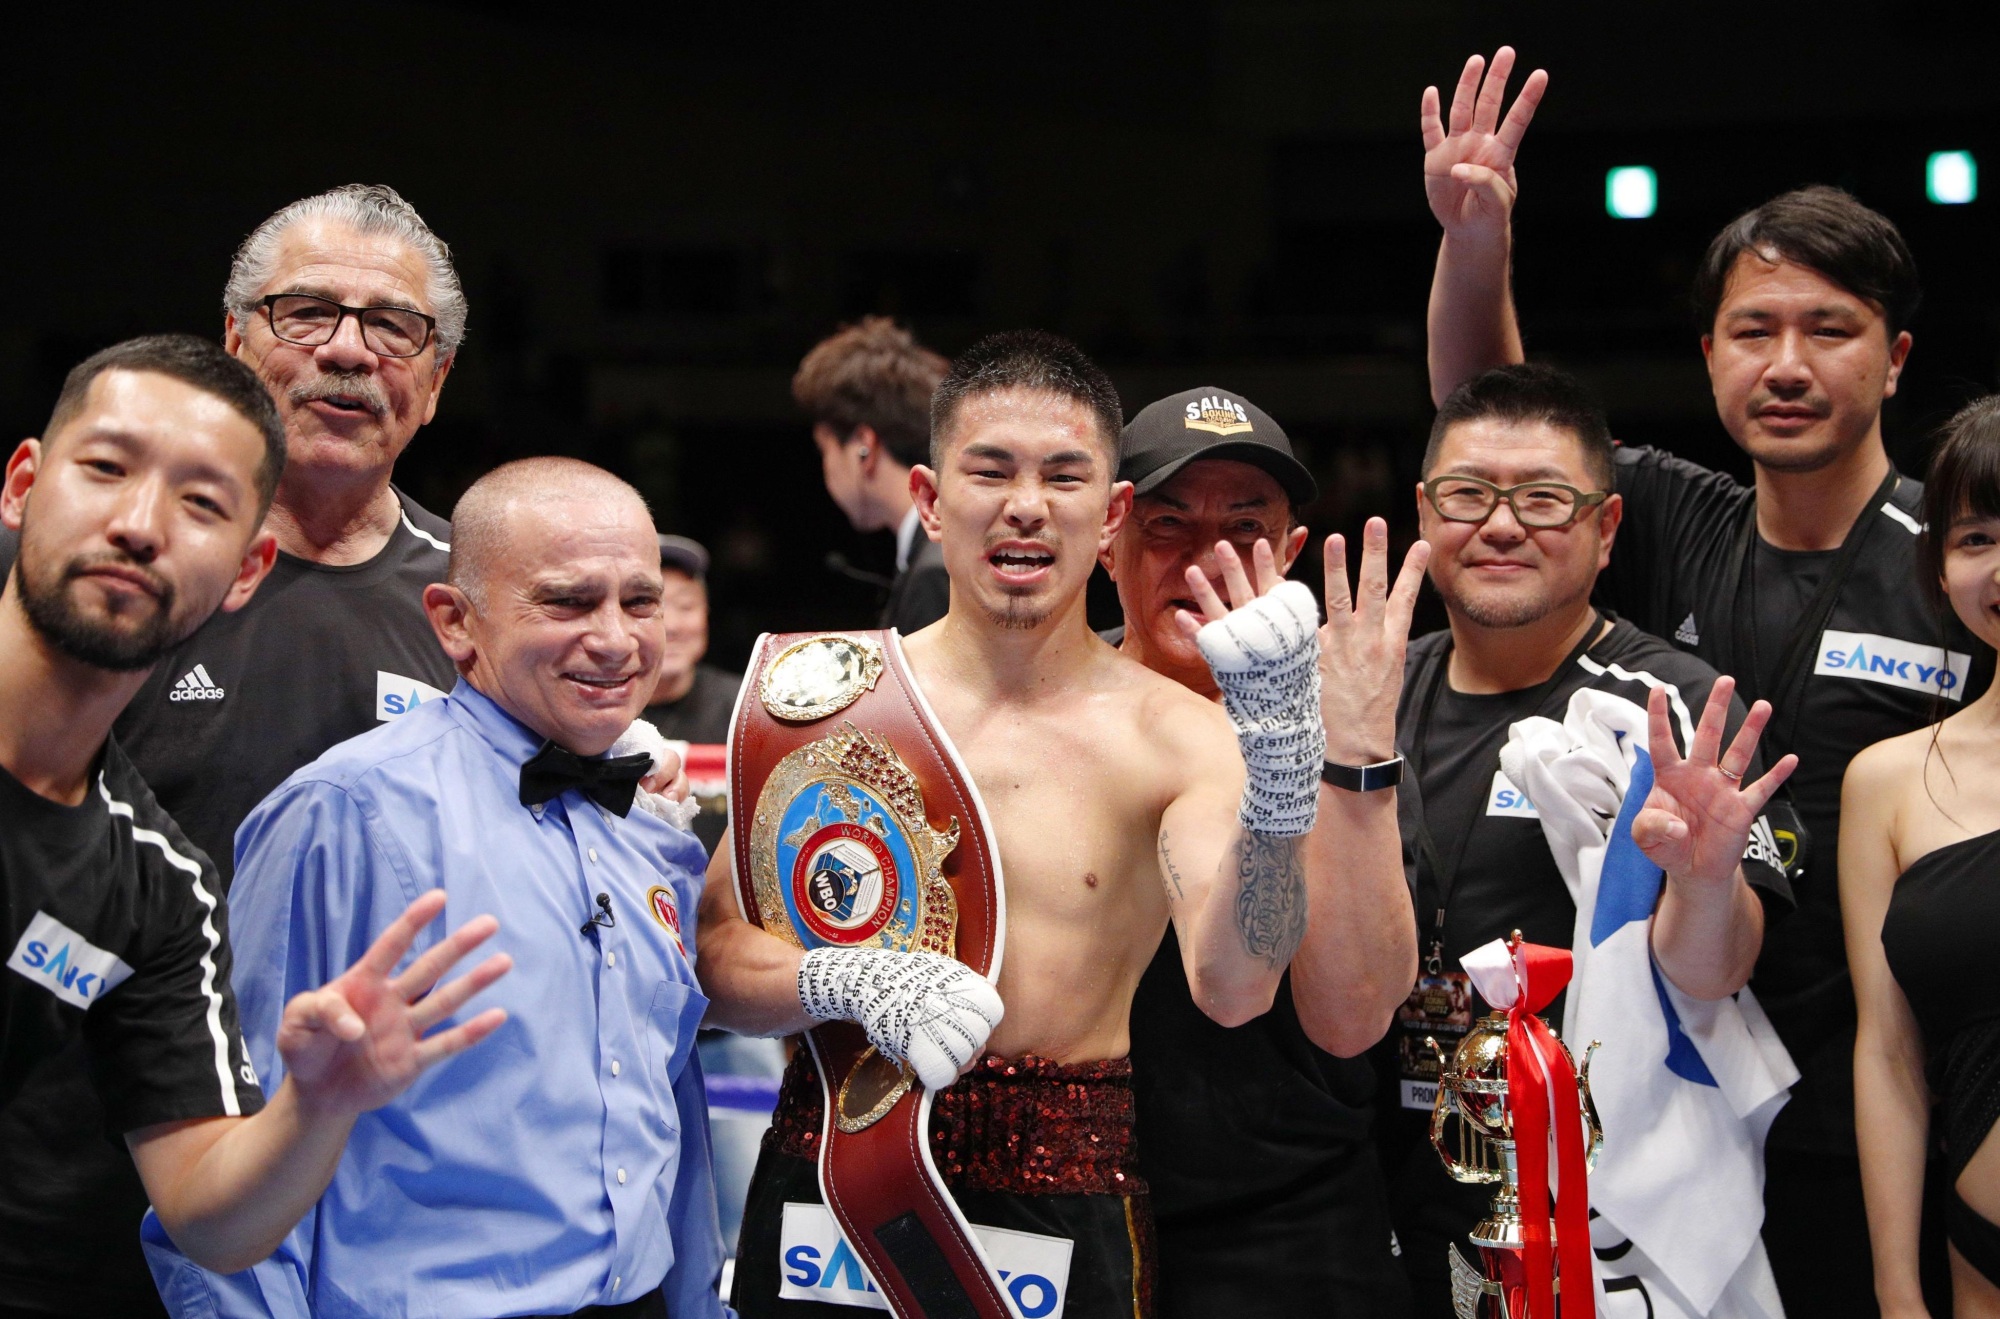 Kazuto Ioka (center) celebrates in the ring after his victory over Aston Palicte for the vacant WBO super flyweight championship on Wednesday night at Makuhari Messe in Chiba. The victory made Ioka the first Japanese man to win world titles in four different weight classes. | KYODO